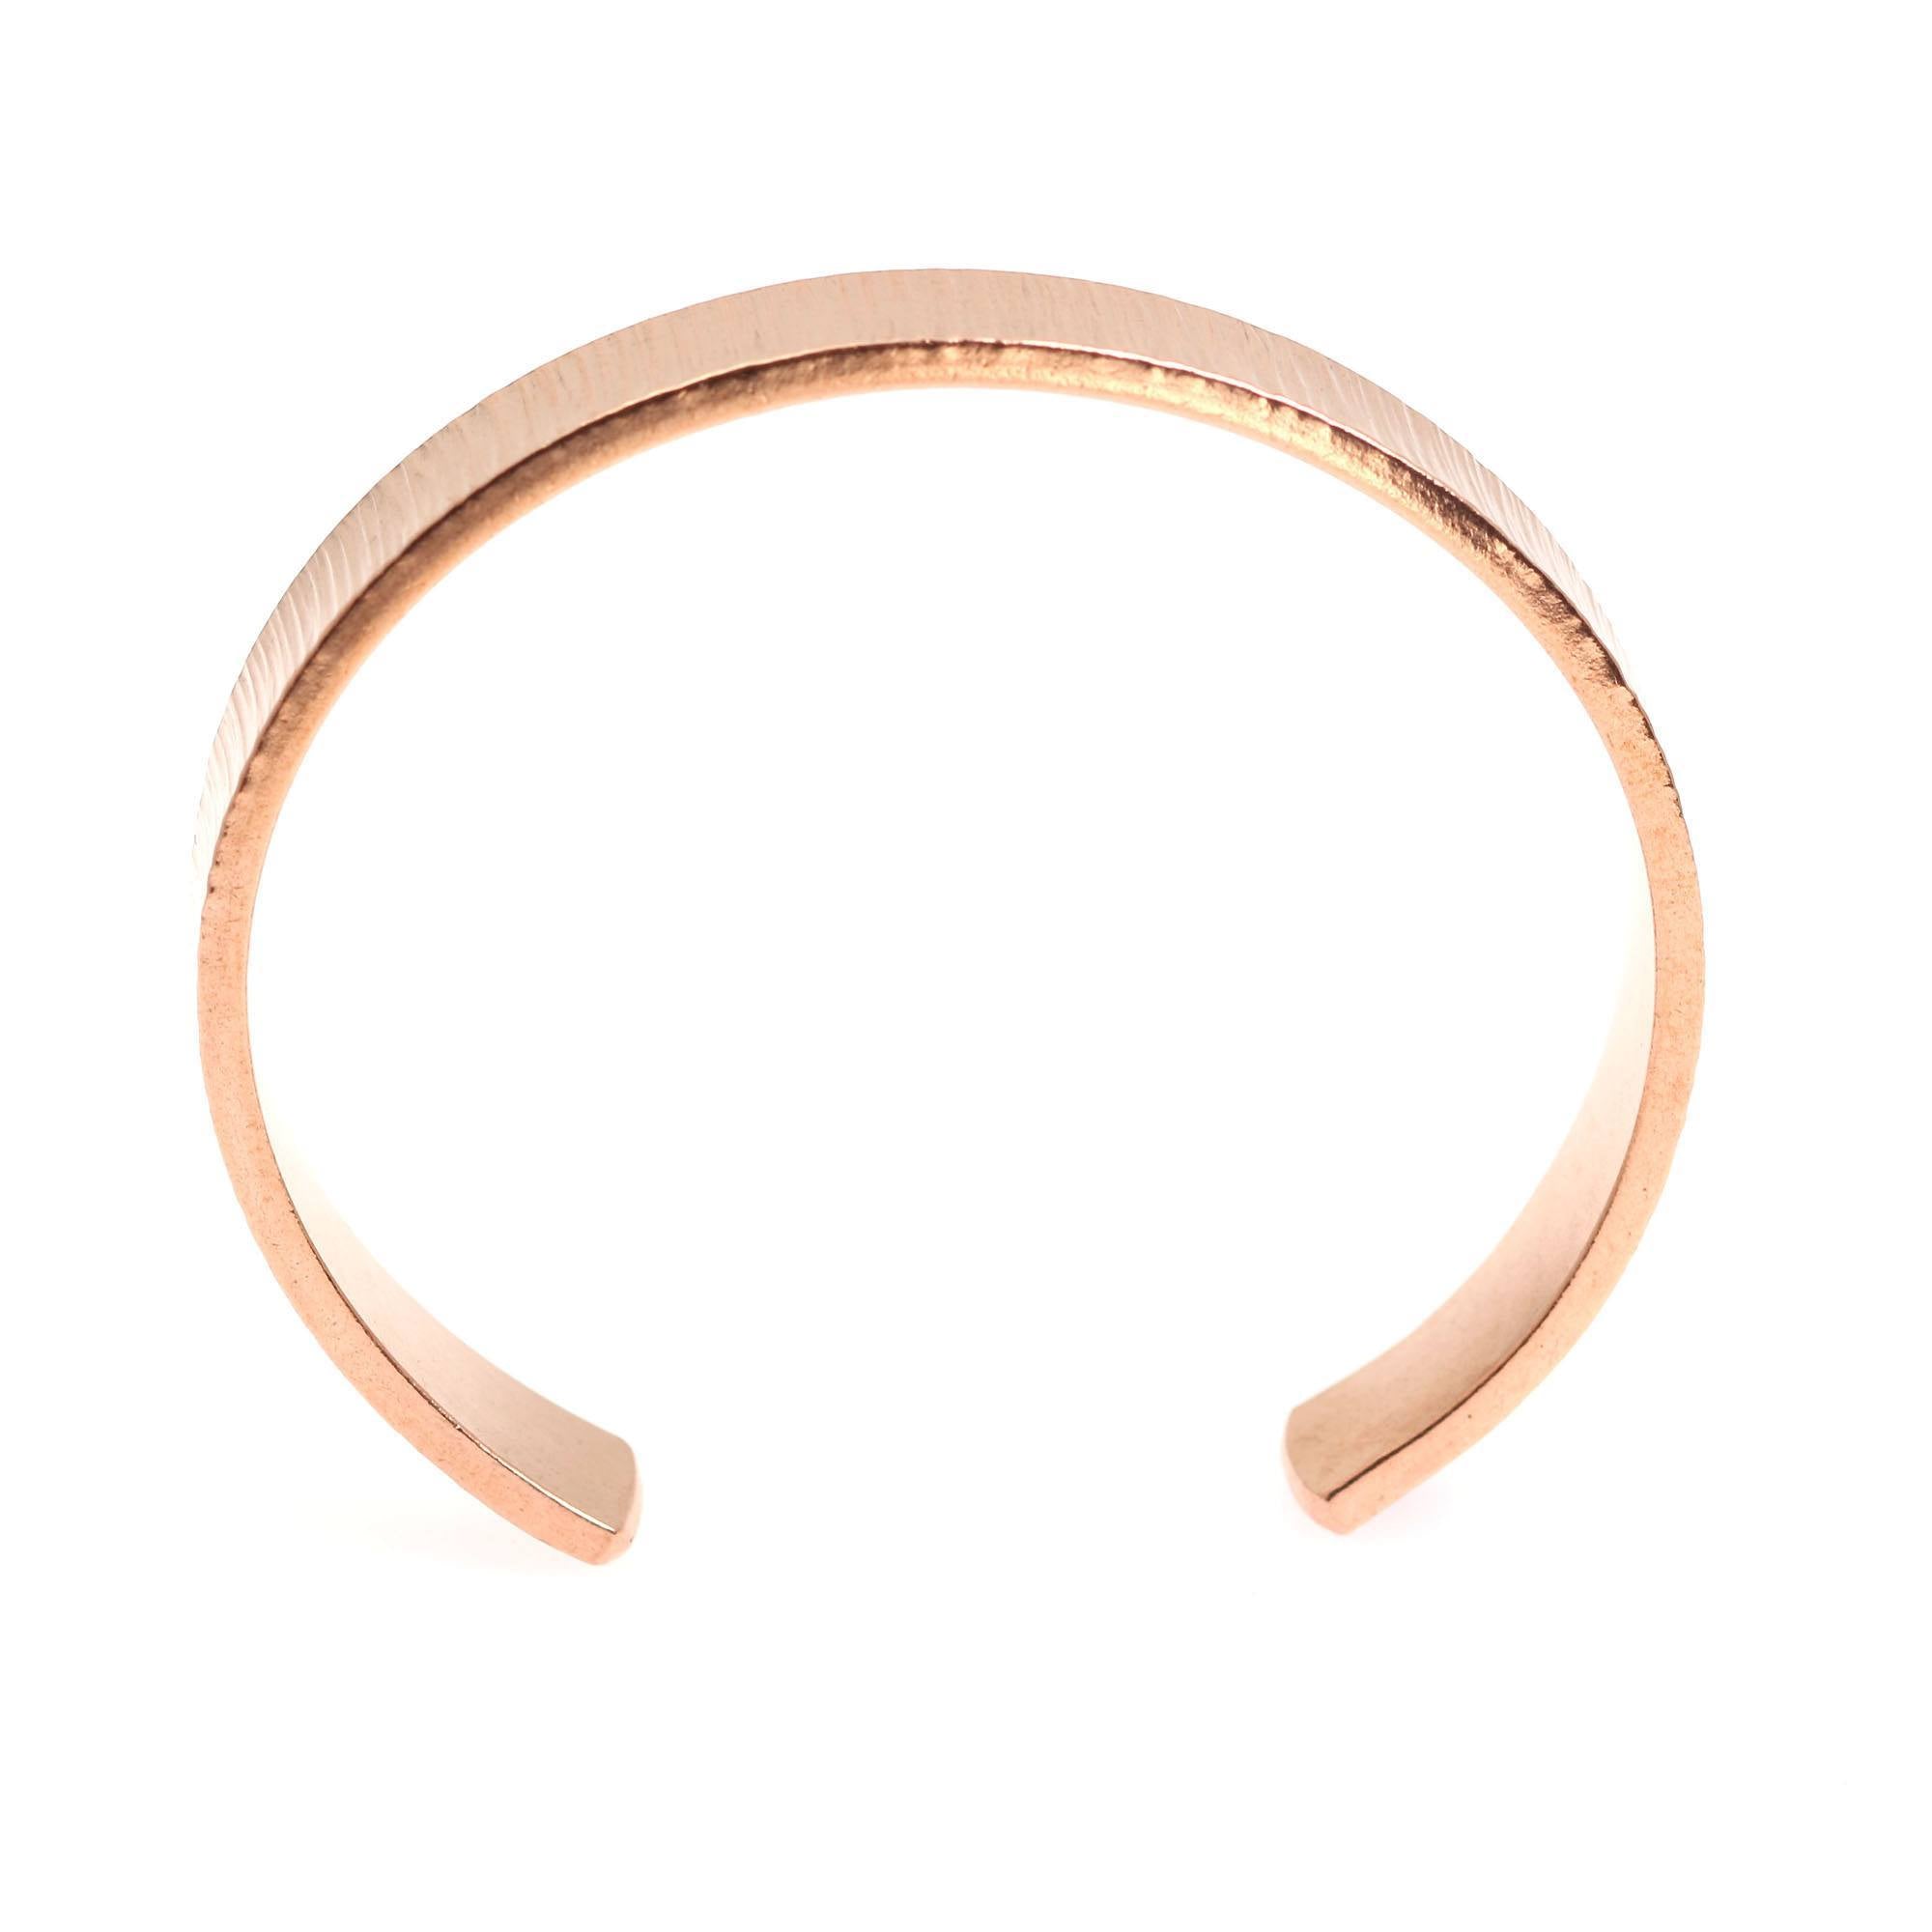 Shape of 10mm Wide Chased Copper Cuff Bracelet 